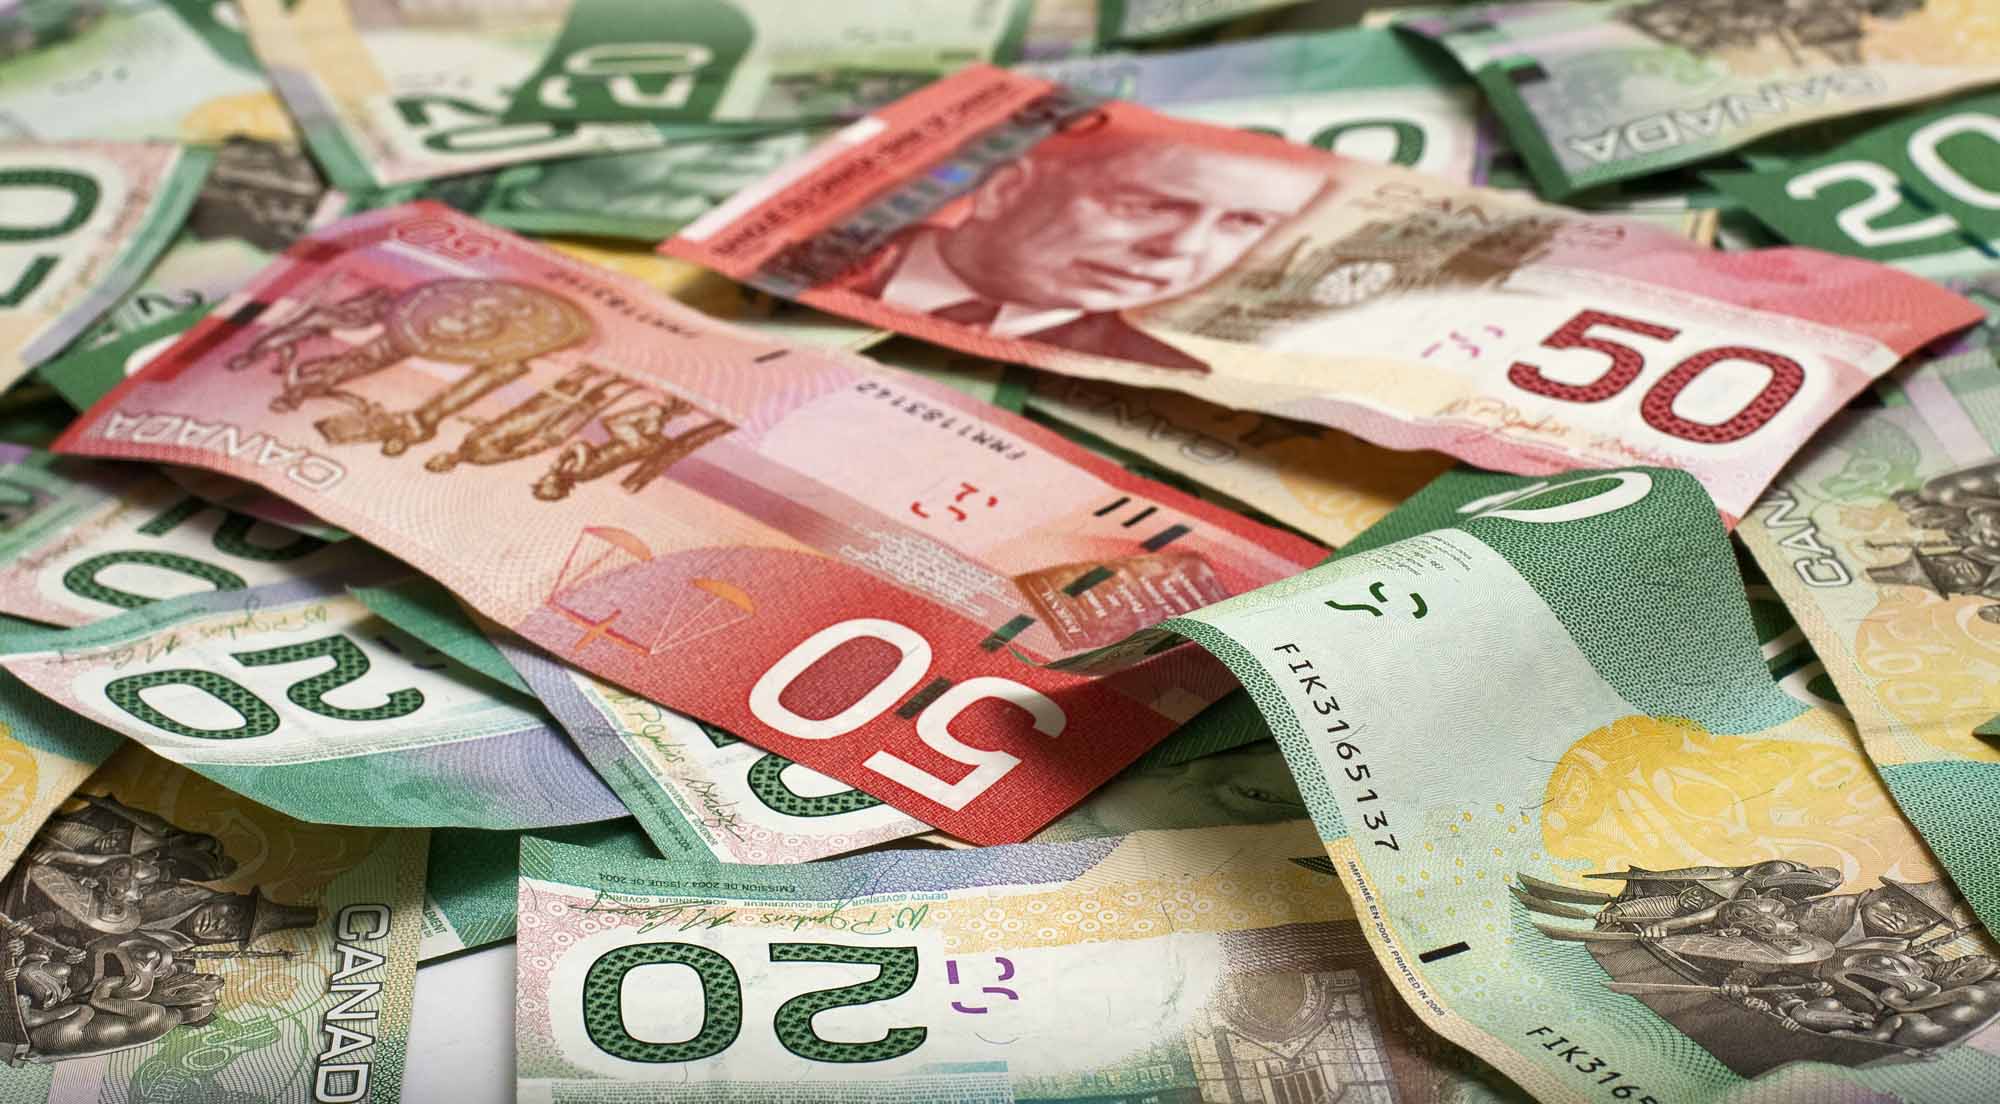 Coming to Canada? Here’s what you should know about carrying or moving ‘Cash’ to Canada